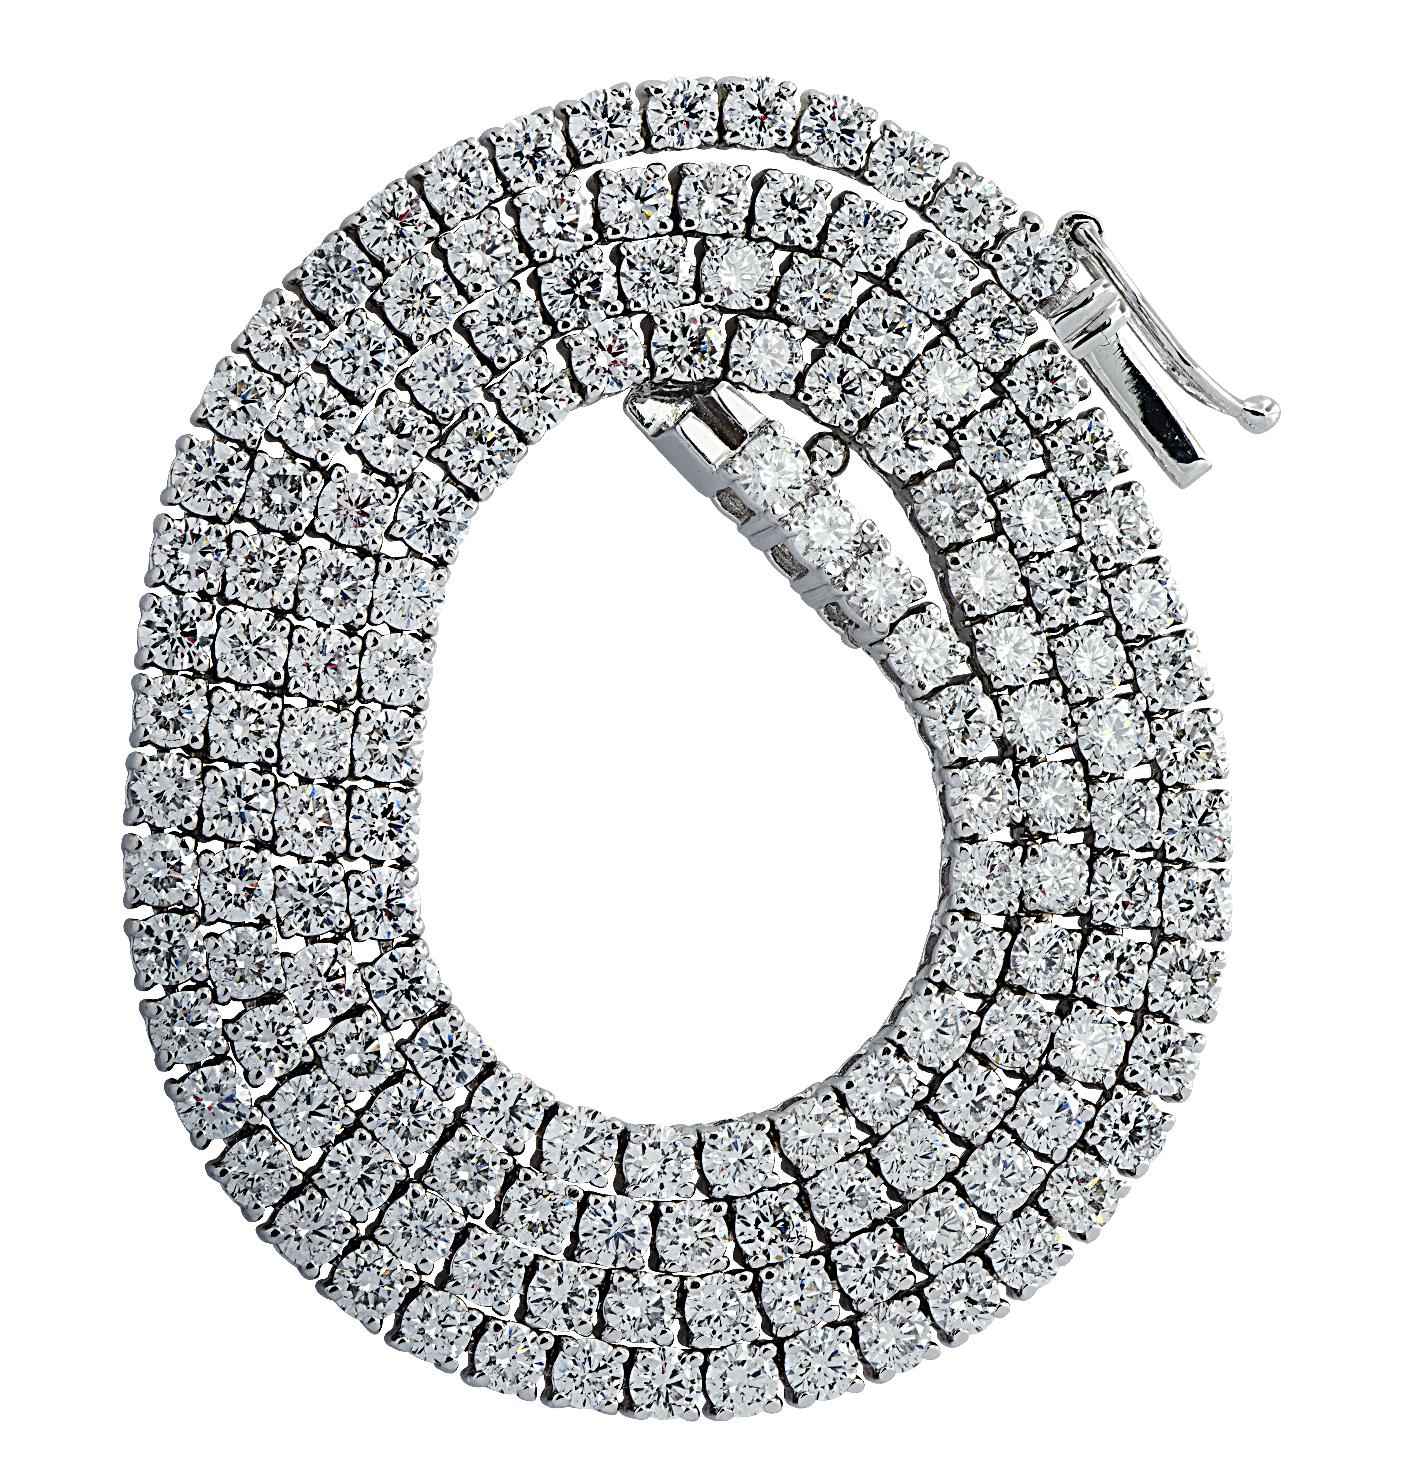 Exquisite Vivid Diamonds Straight Line diamond tennis necklace crafted in White Gold, showcasing 133 round brilliant cut diamonds weighing 12.52 carats, G color, VS-SI Clarity. Each diamond was carefully selected, perfectly matched and set in a